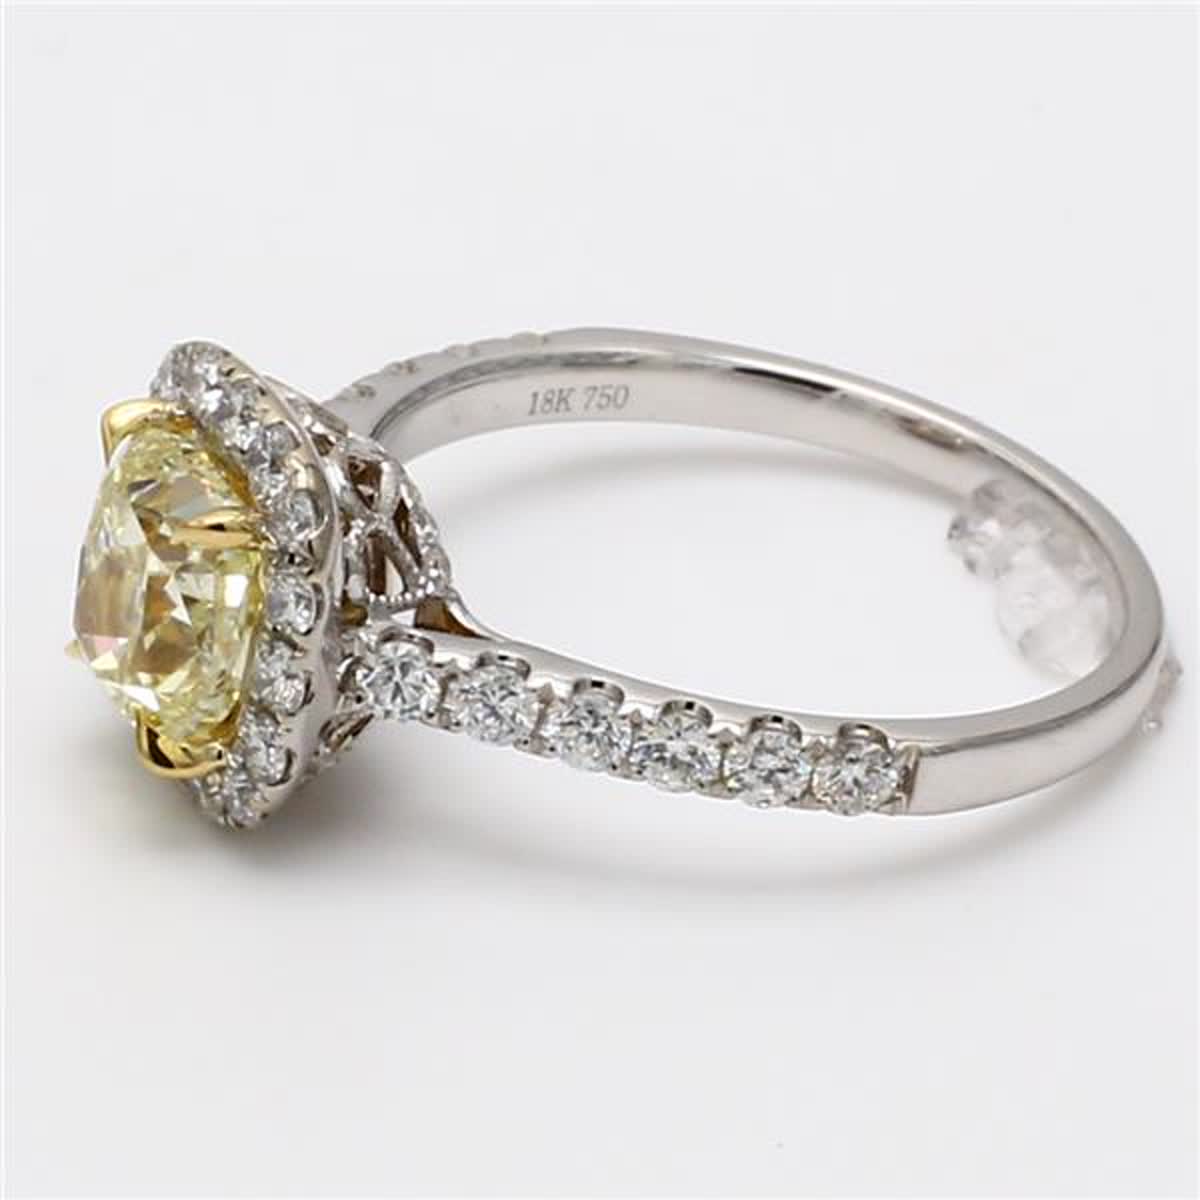 GIA Certified Natural Yellow Cushion and White Diamond 2.14 Carat TW Gold Ring